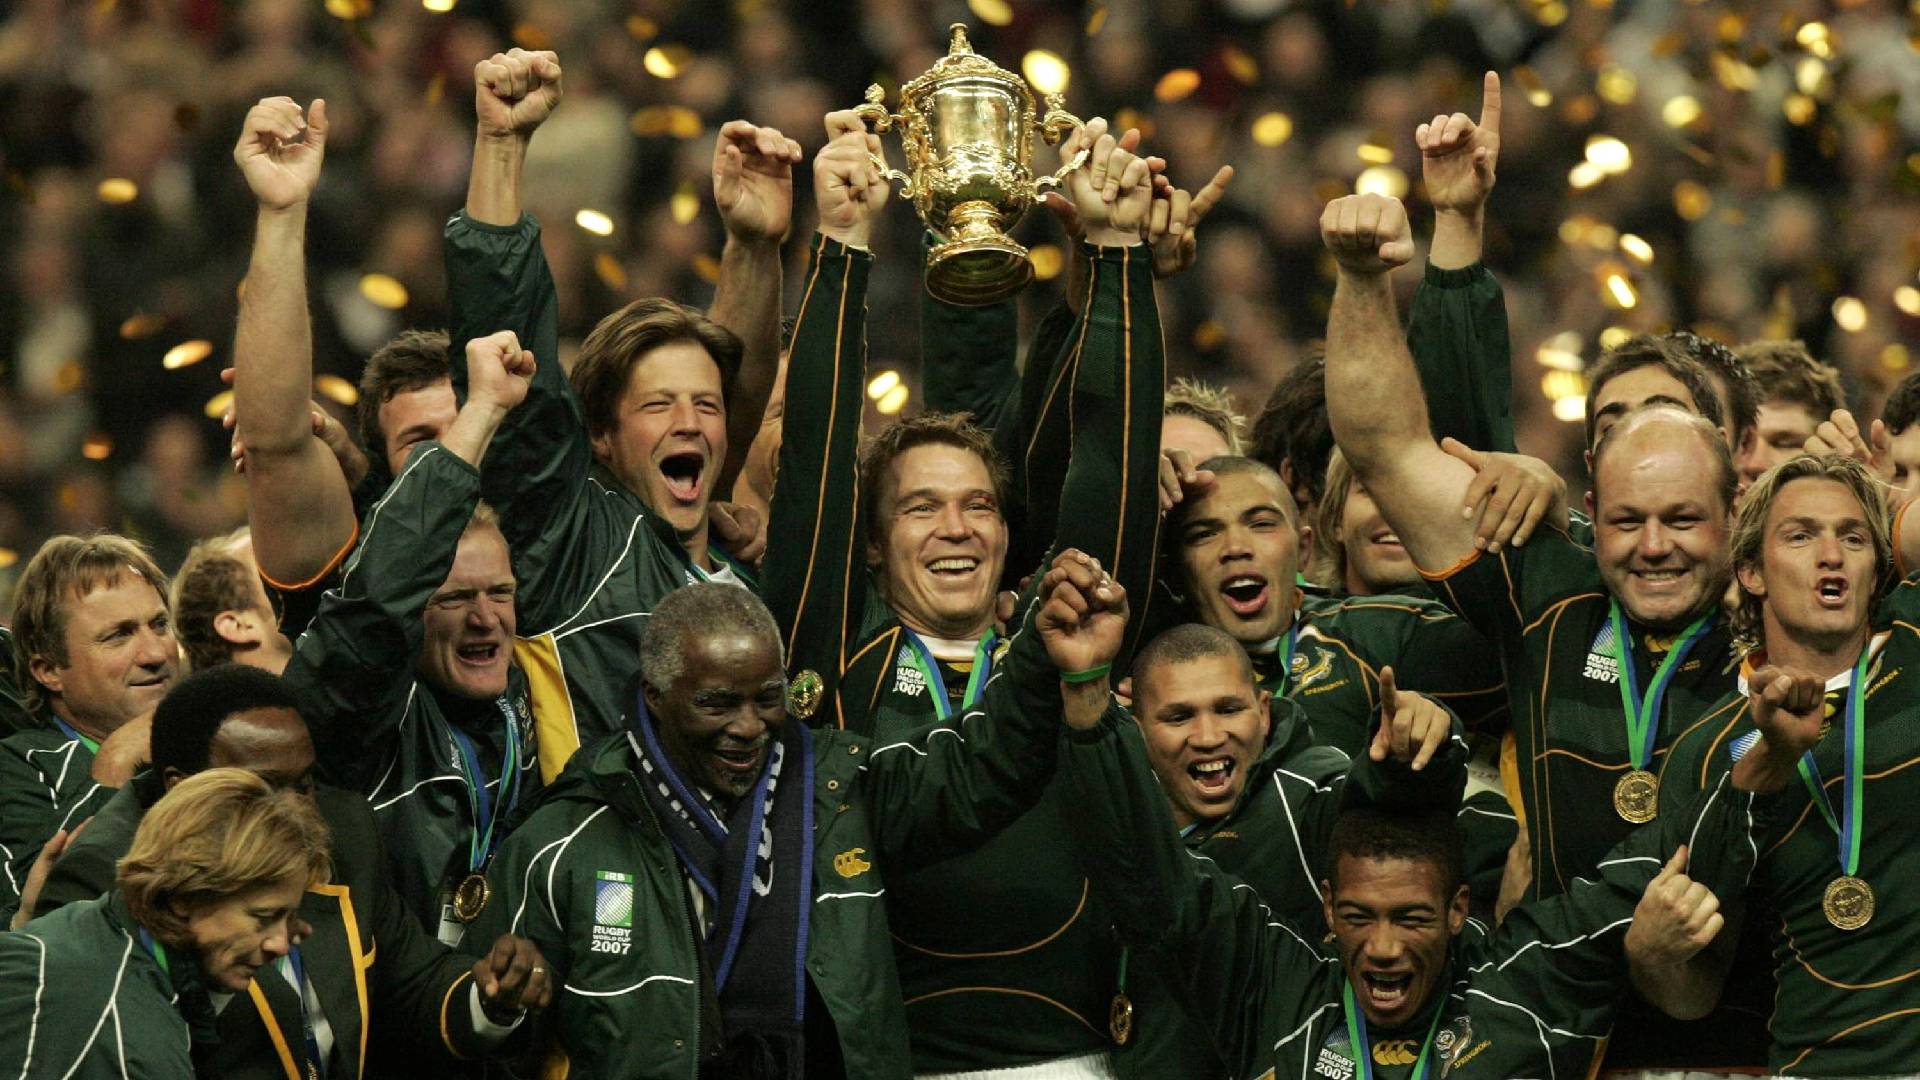 Springboks 2007 World Cup stars: Where are they now?